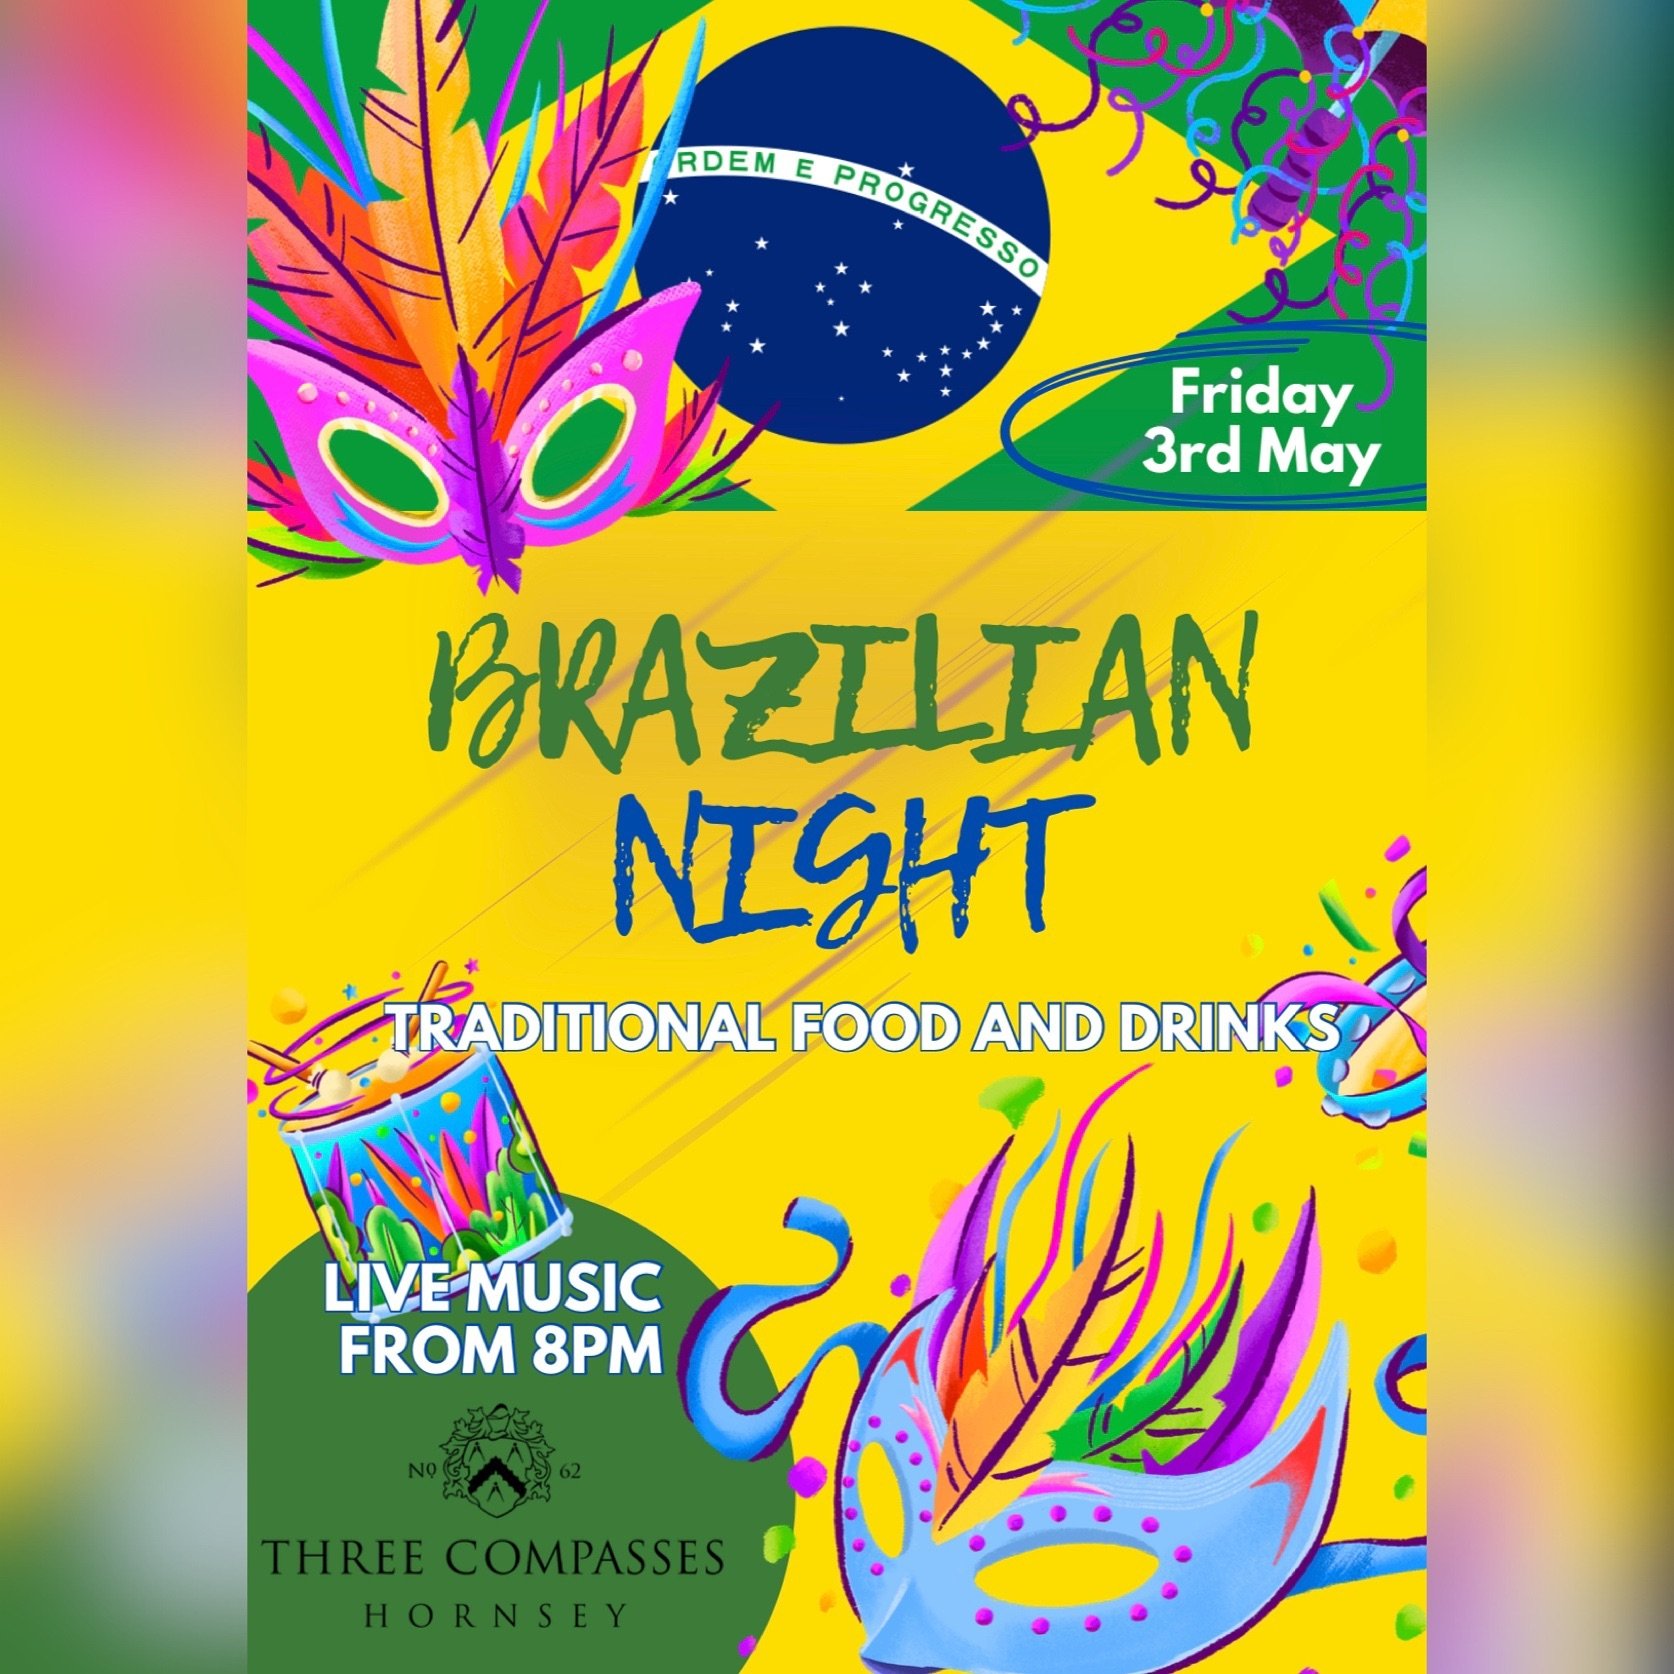 🇧🇷🇧🇷🇧🇷Brazilian night is back! Friday 3rd May - Brazilian food, music, drinks and fun! Live music from 8pm #brazil #brasilianmusic #pubmusic #livemusic #brazilianfood